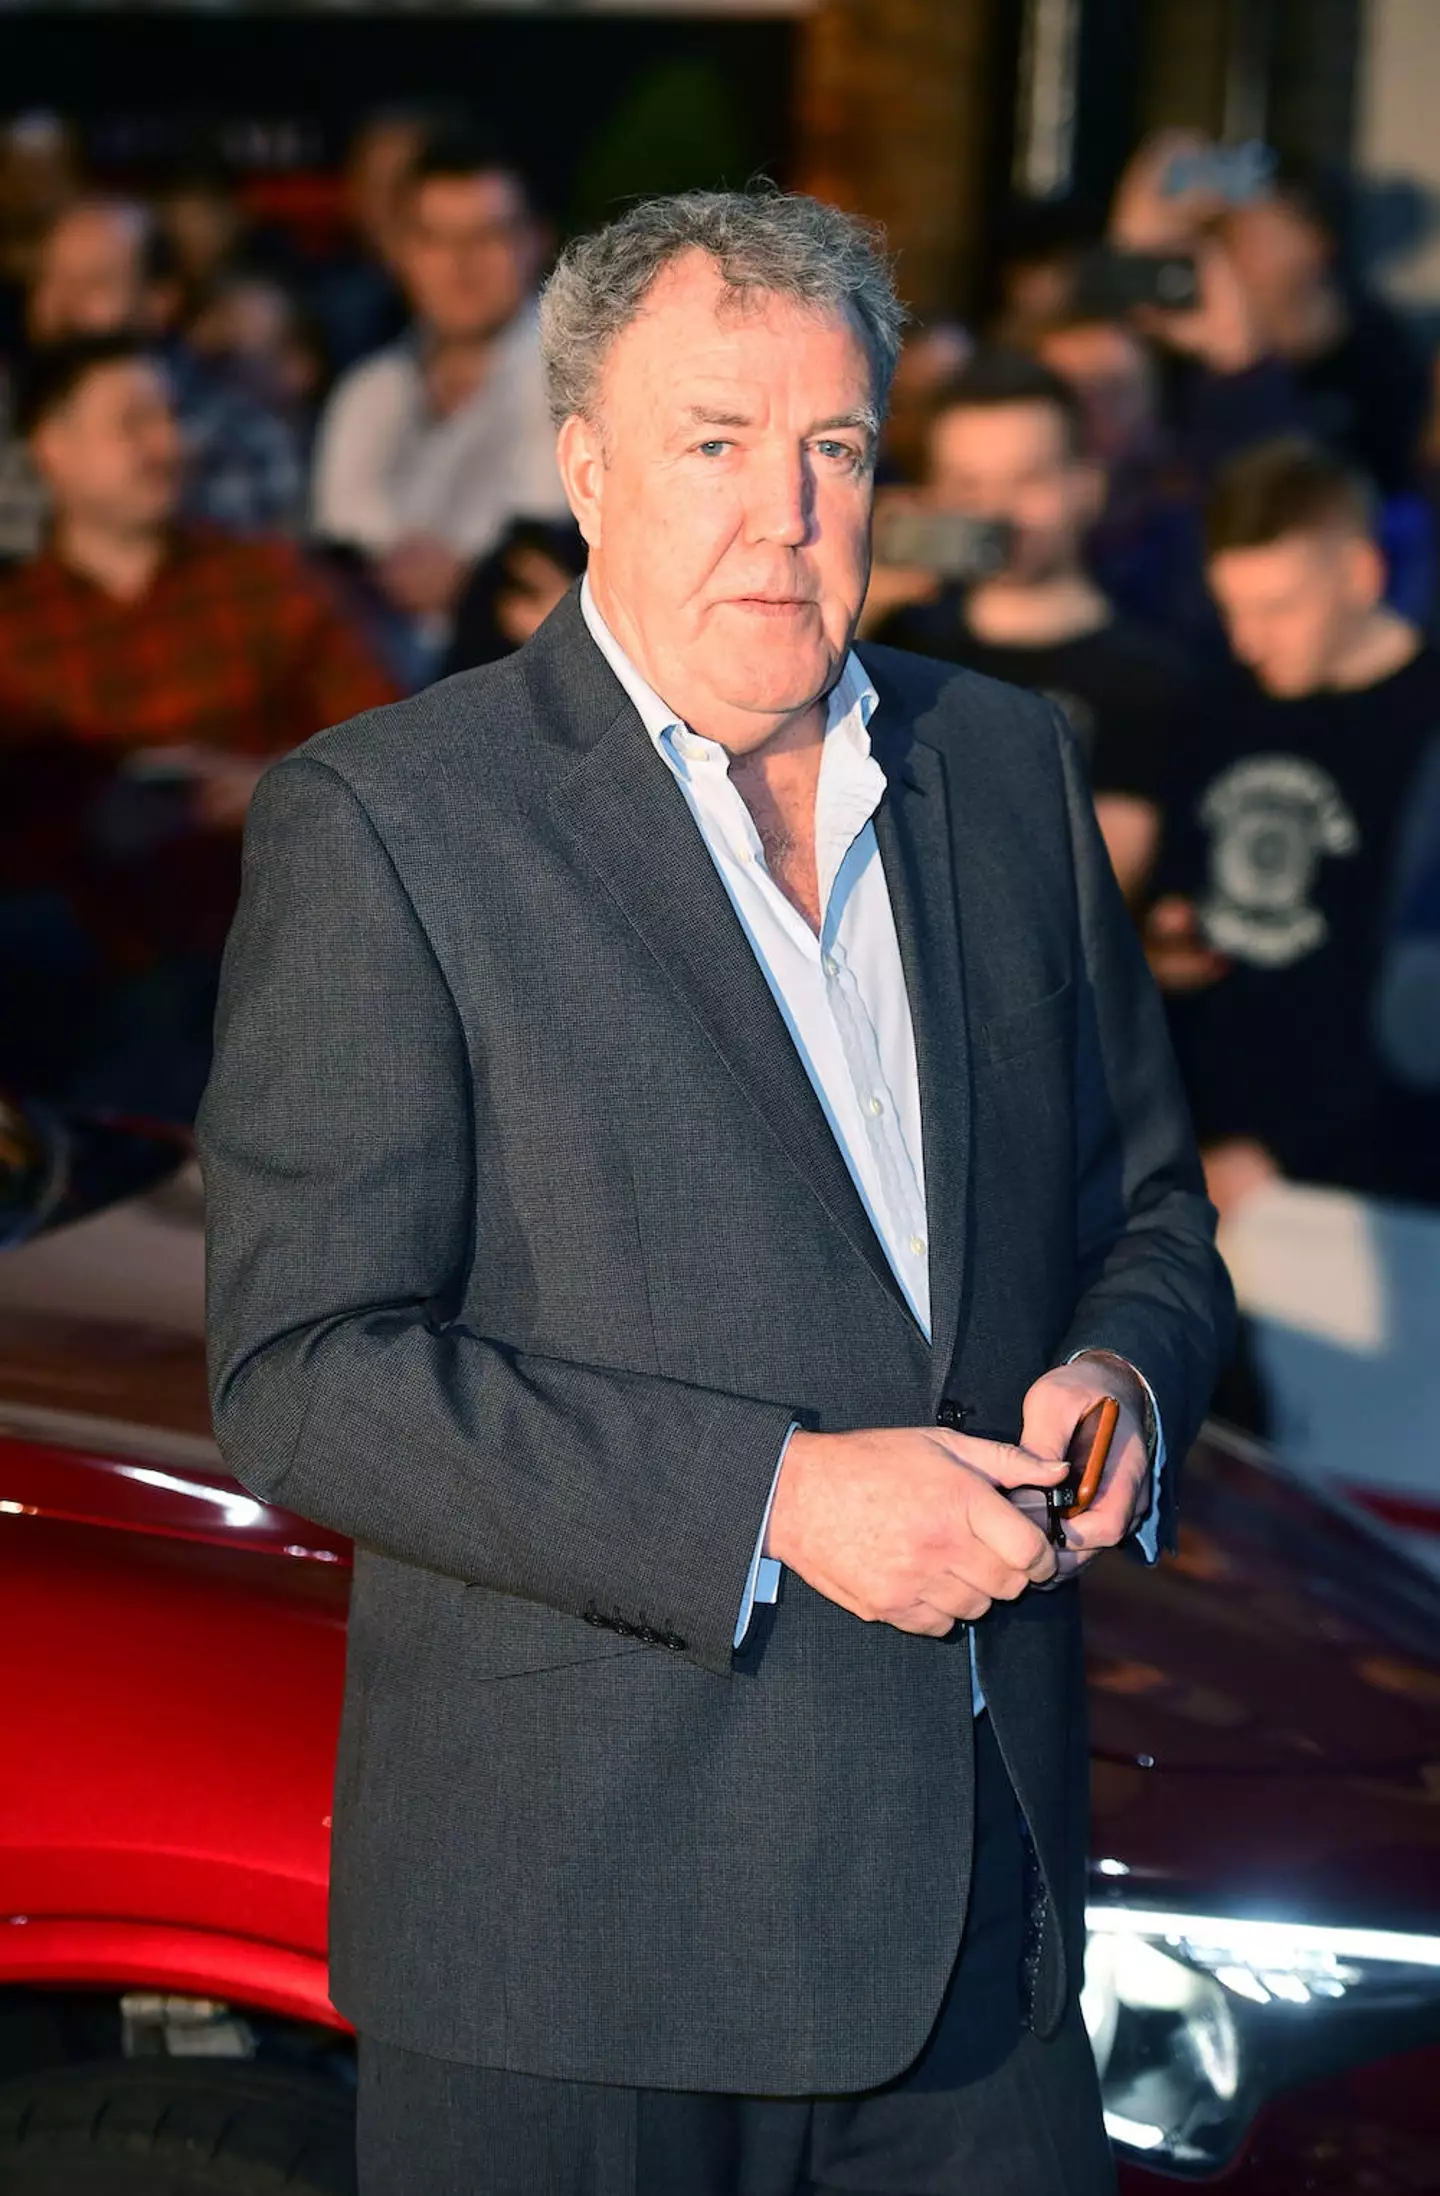 People have slammed Clarkson for his 'violent' tirade.